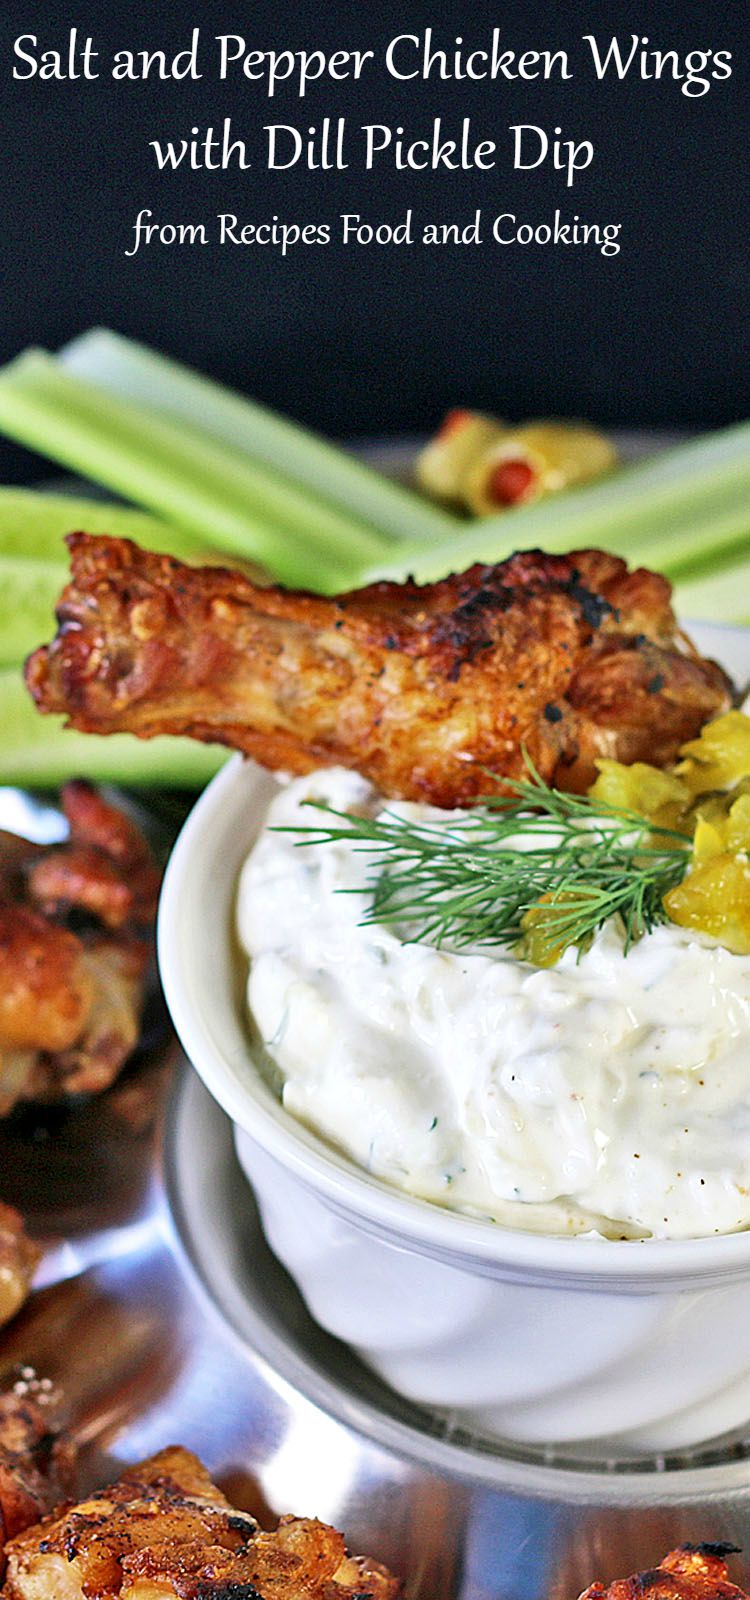 Salt and Pepper Chicken Wings with Dill Pickle Dip